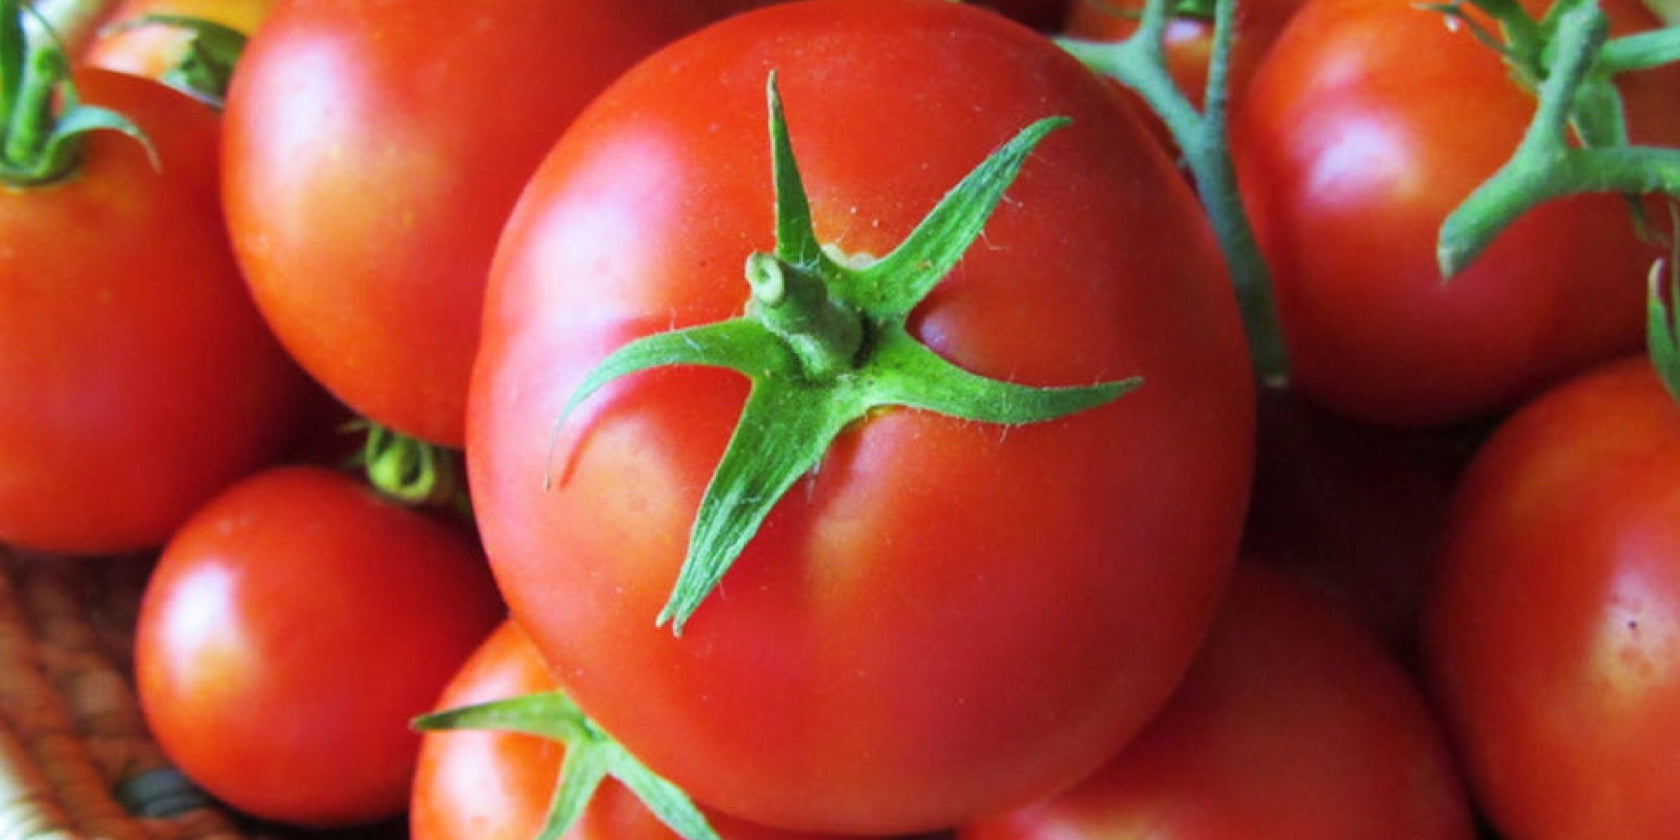 Love tomatoes: nature's anti-ageing weapons